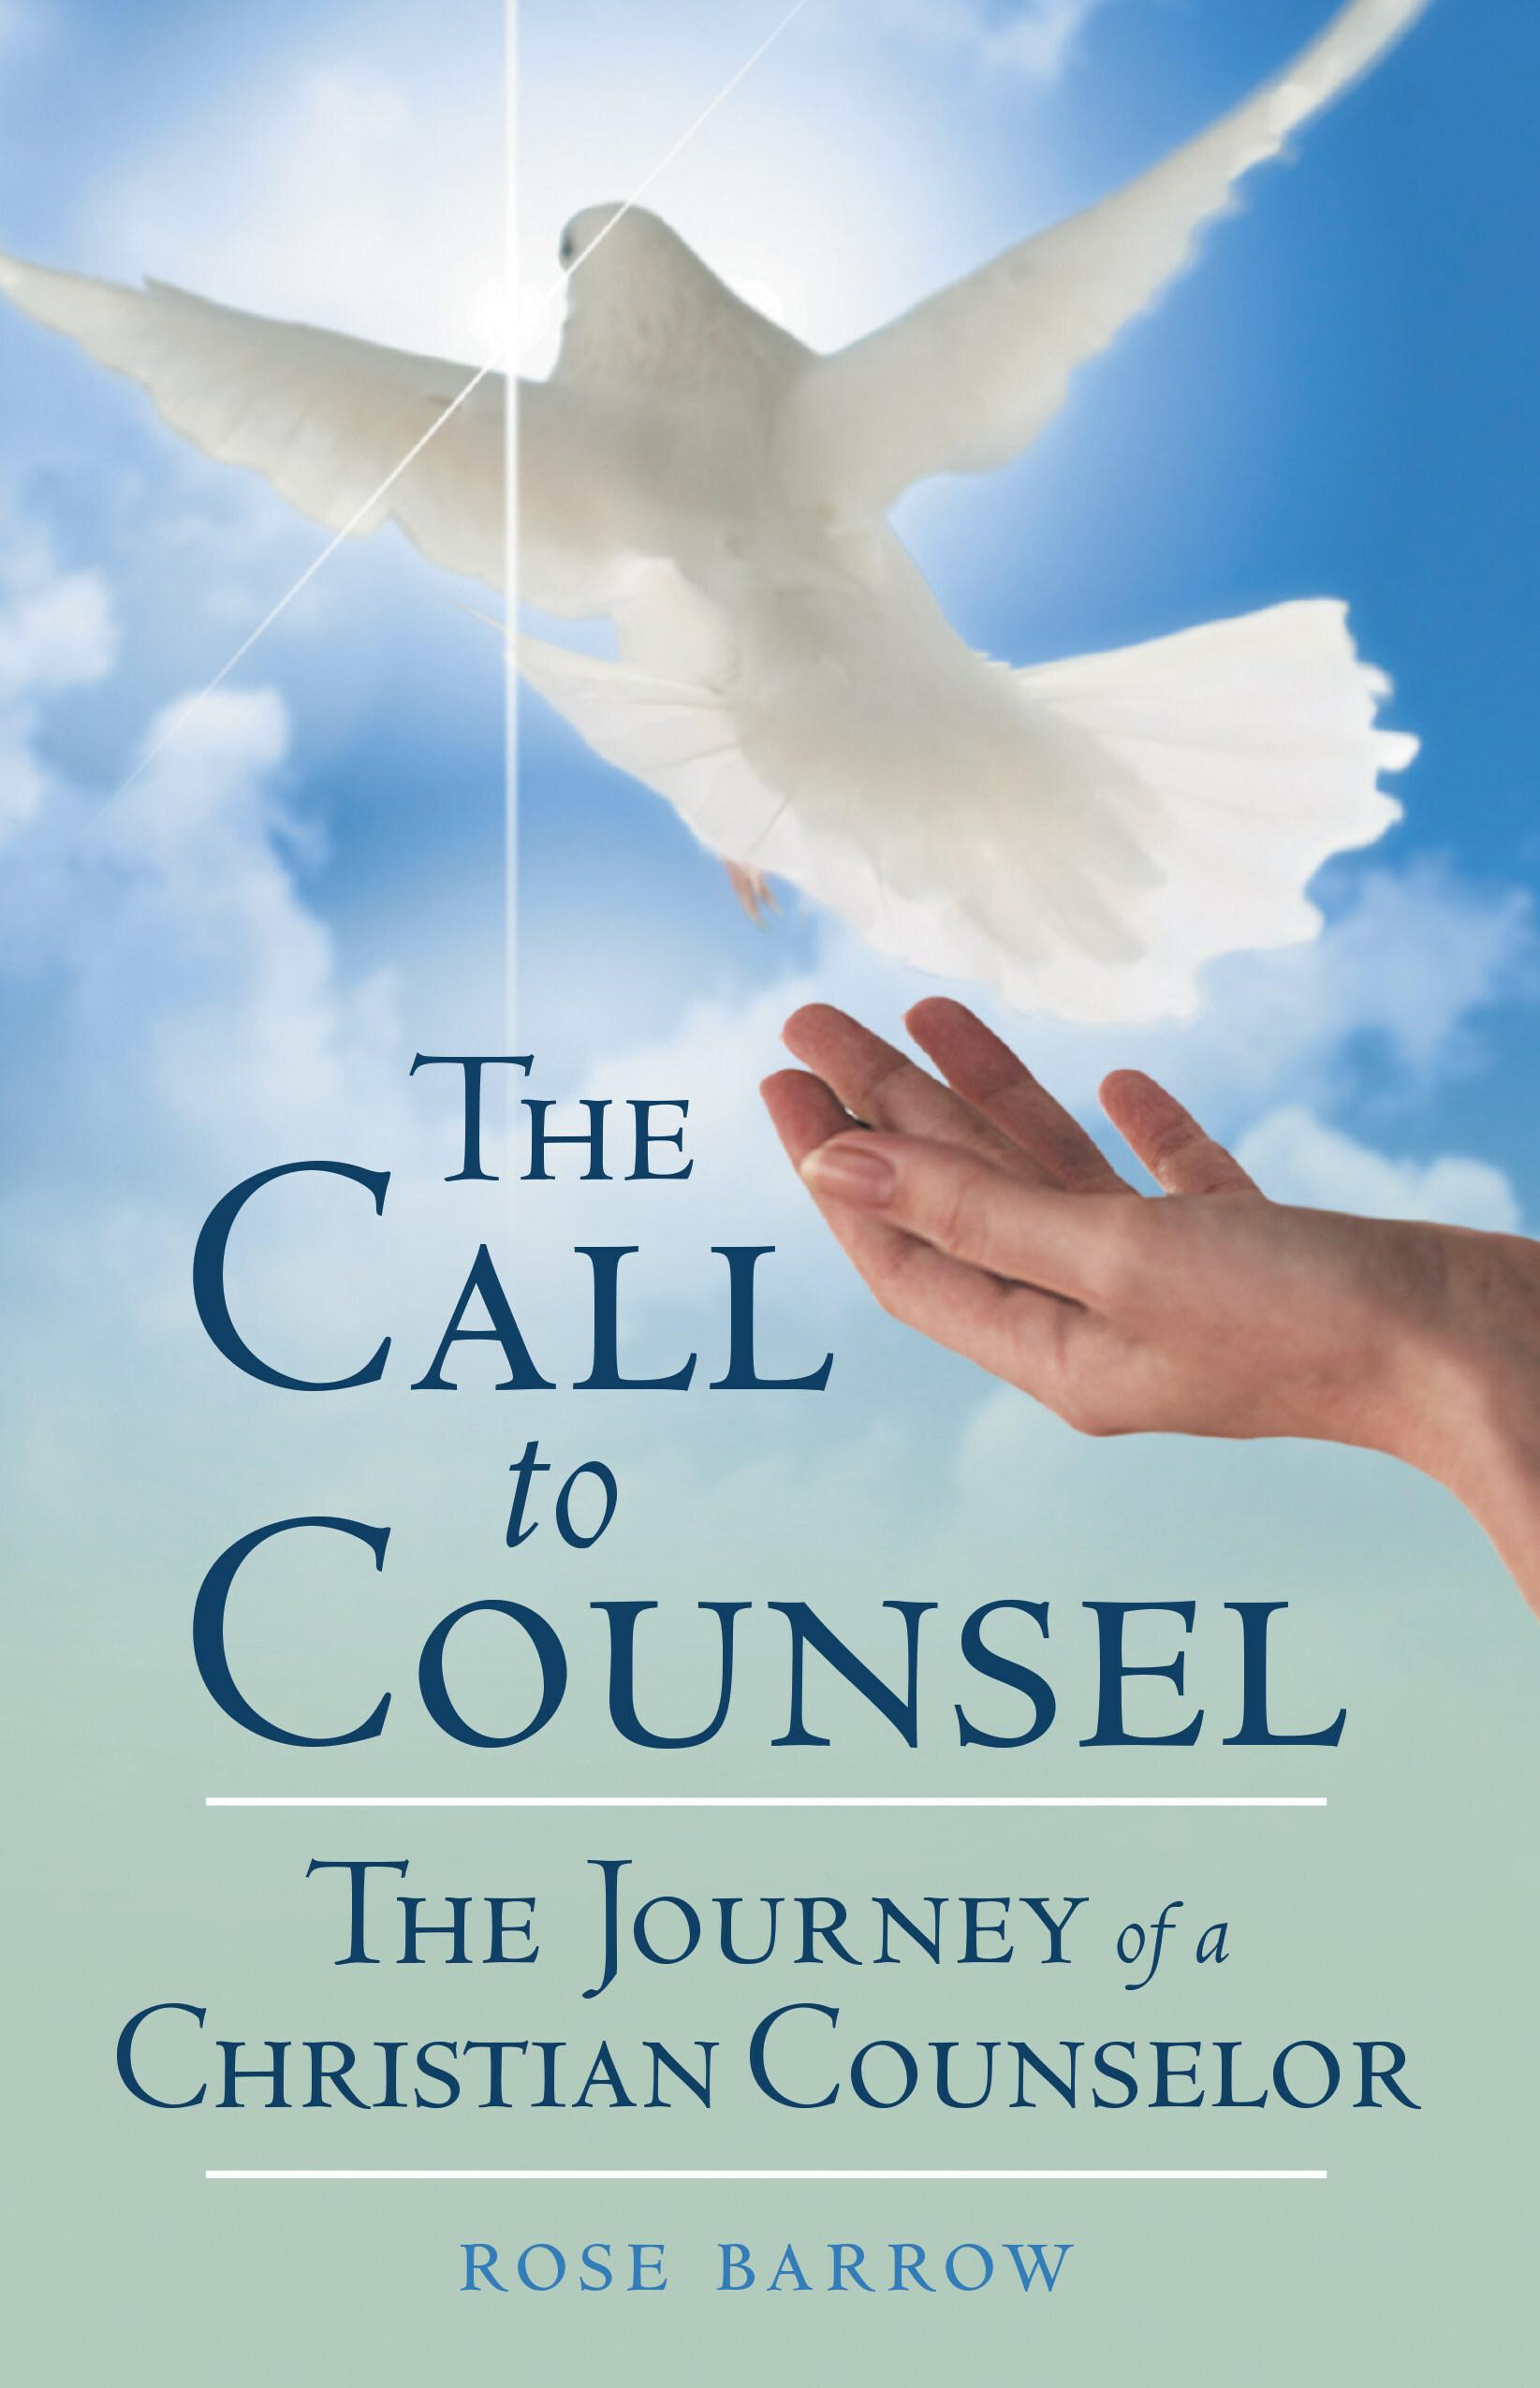 Experienced Clinical Counselor Discusses the Importance of Christian Counseling